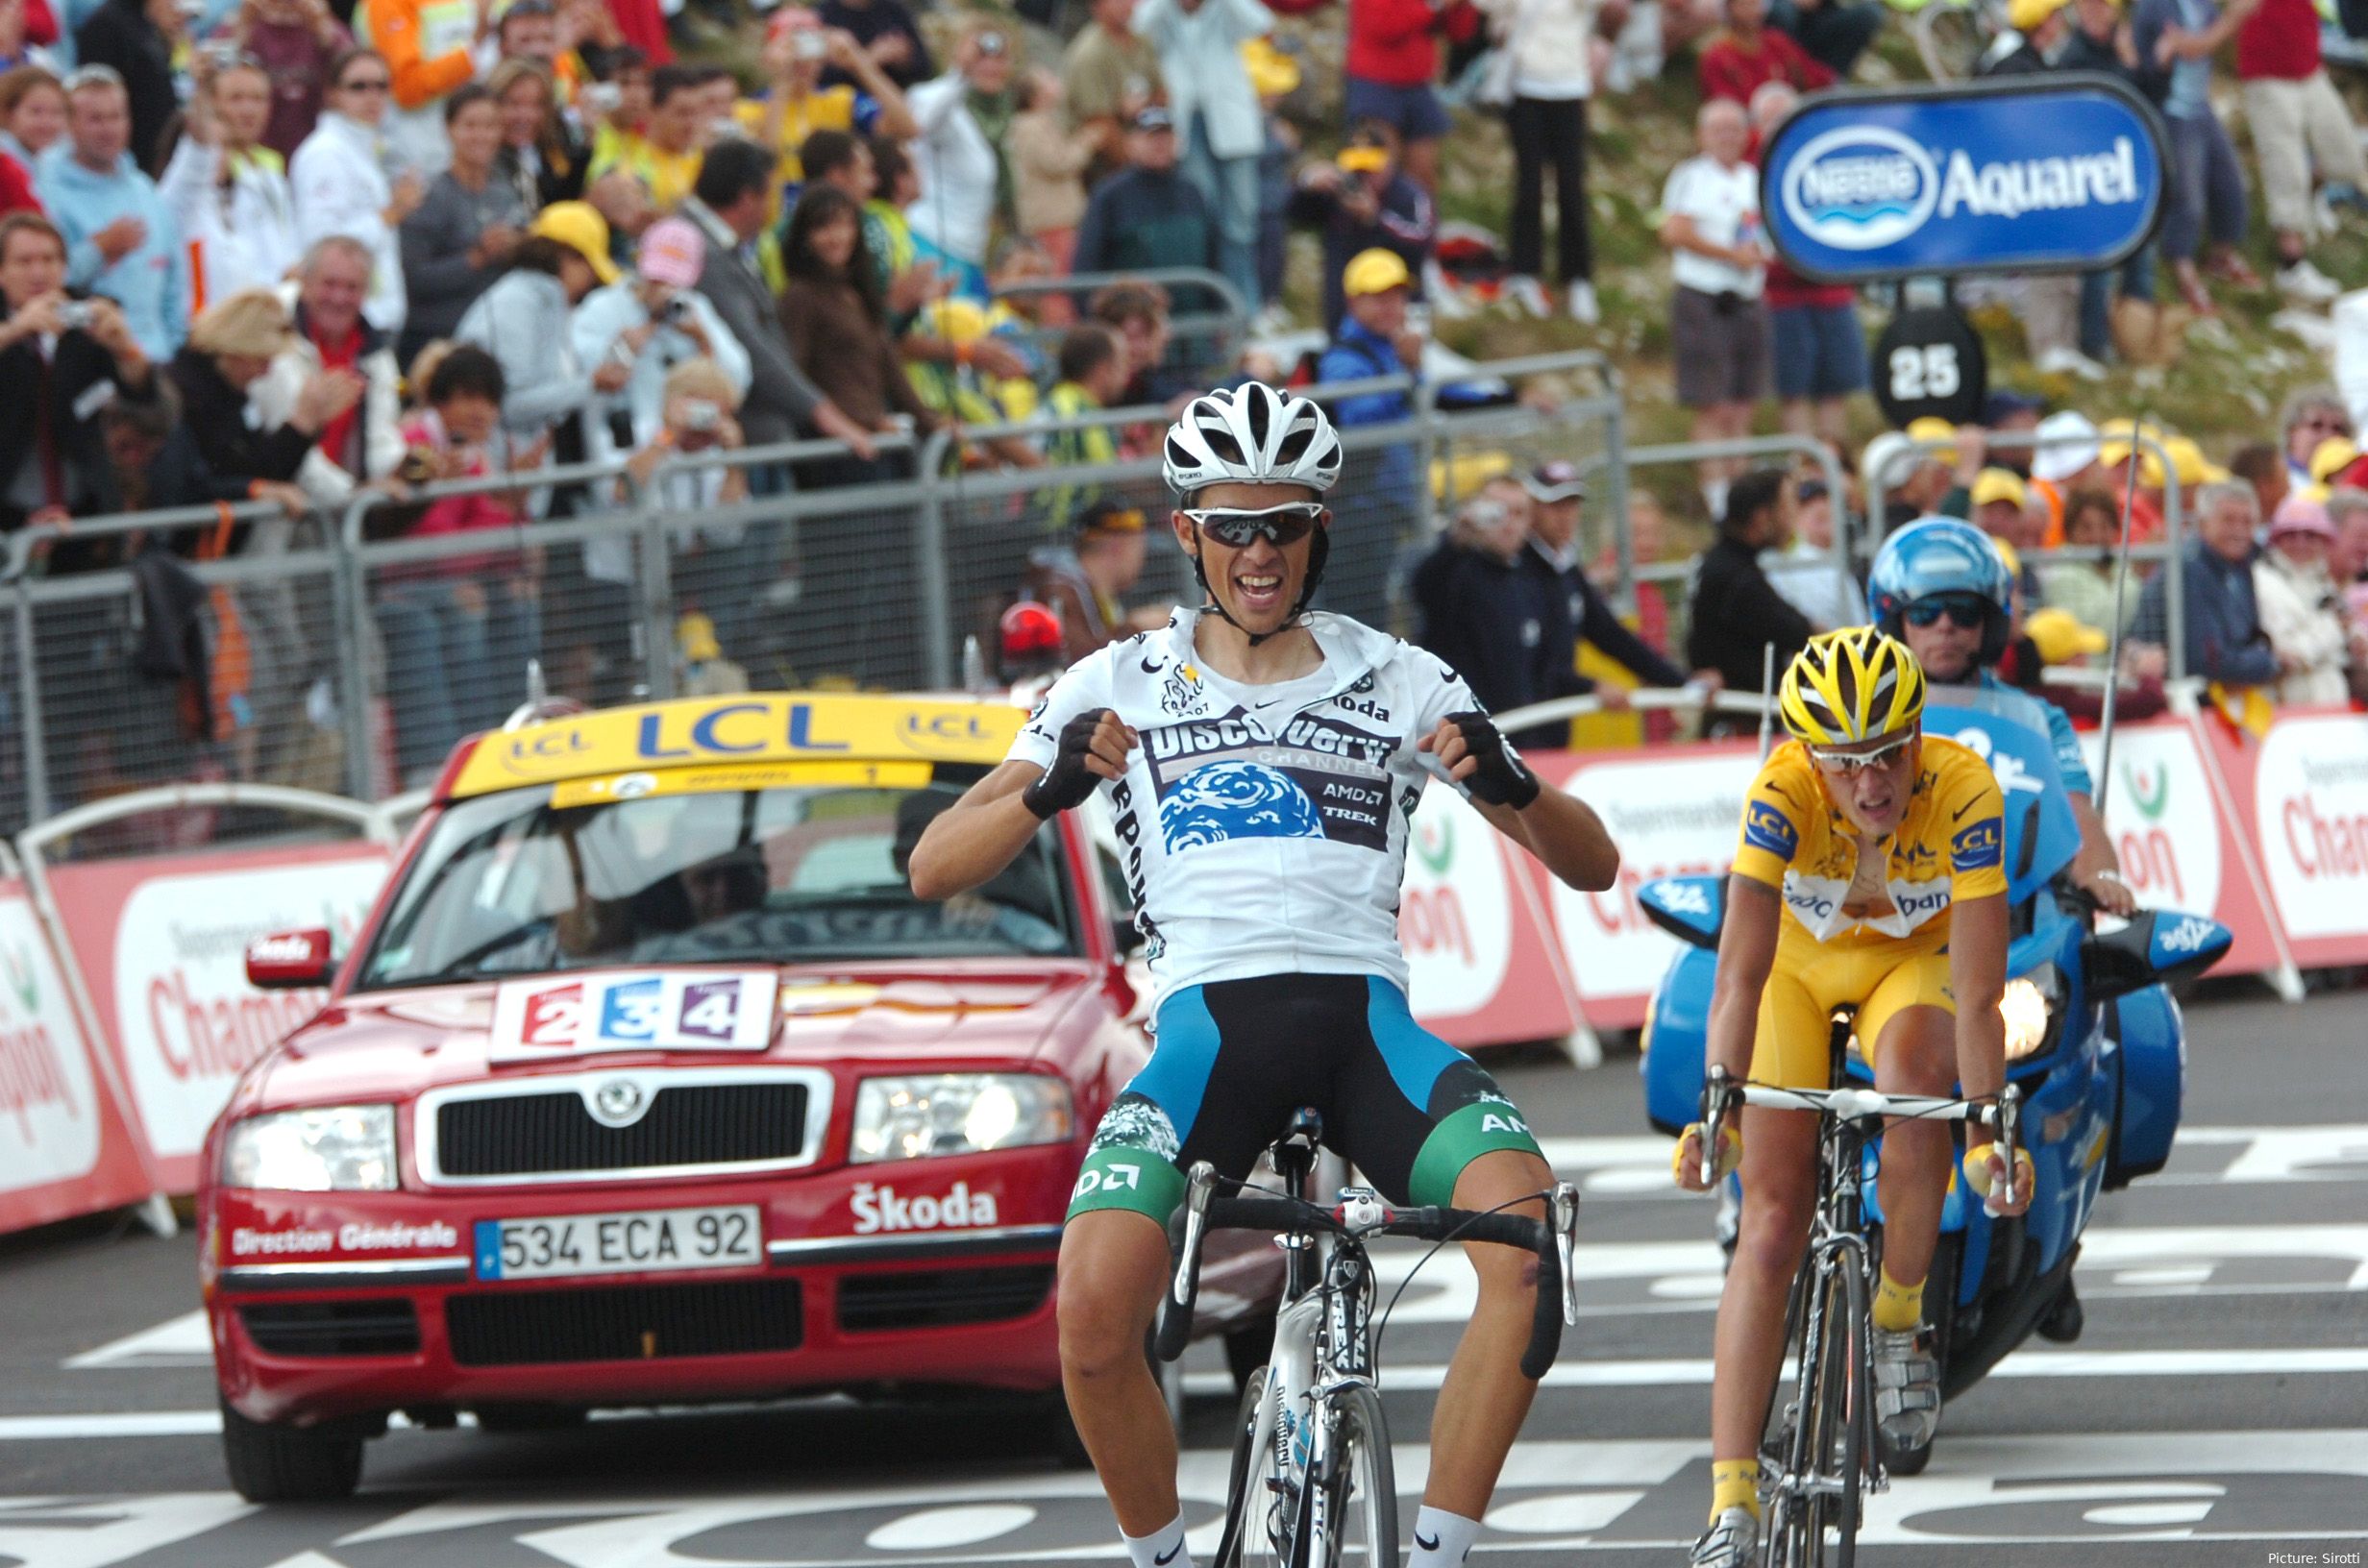 Alberto Contador en route to winning the 2007 Tour de France; the first of many Grand Tours. @Sirotti